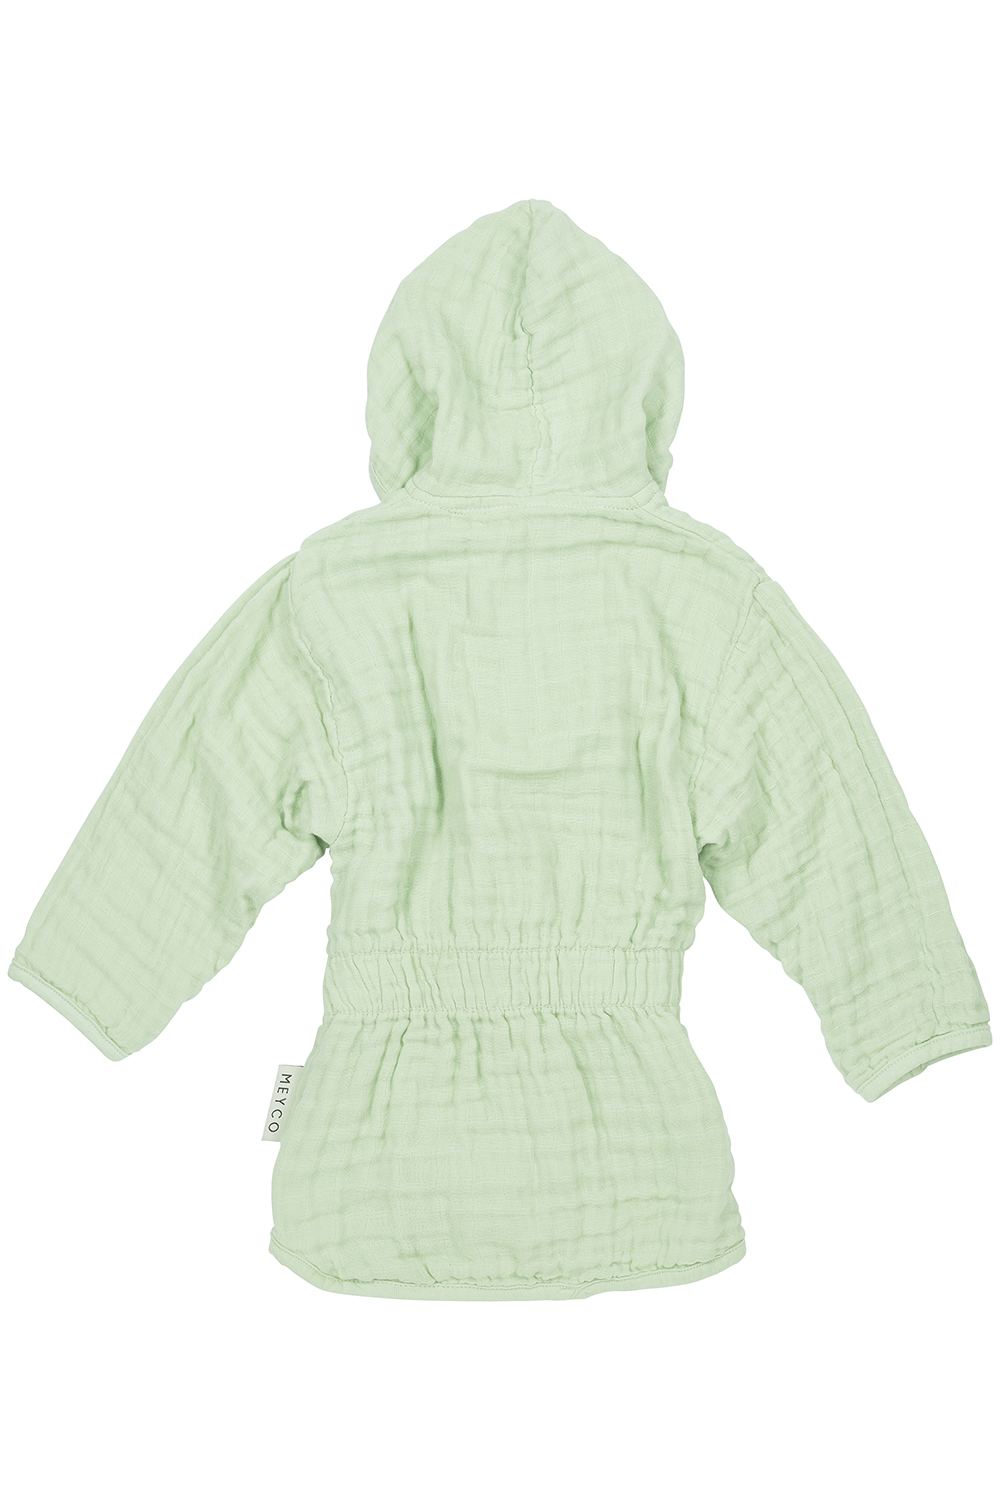 Bademantel pre-washed musselin Uni - soft green - 86/92